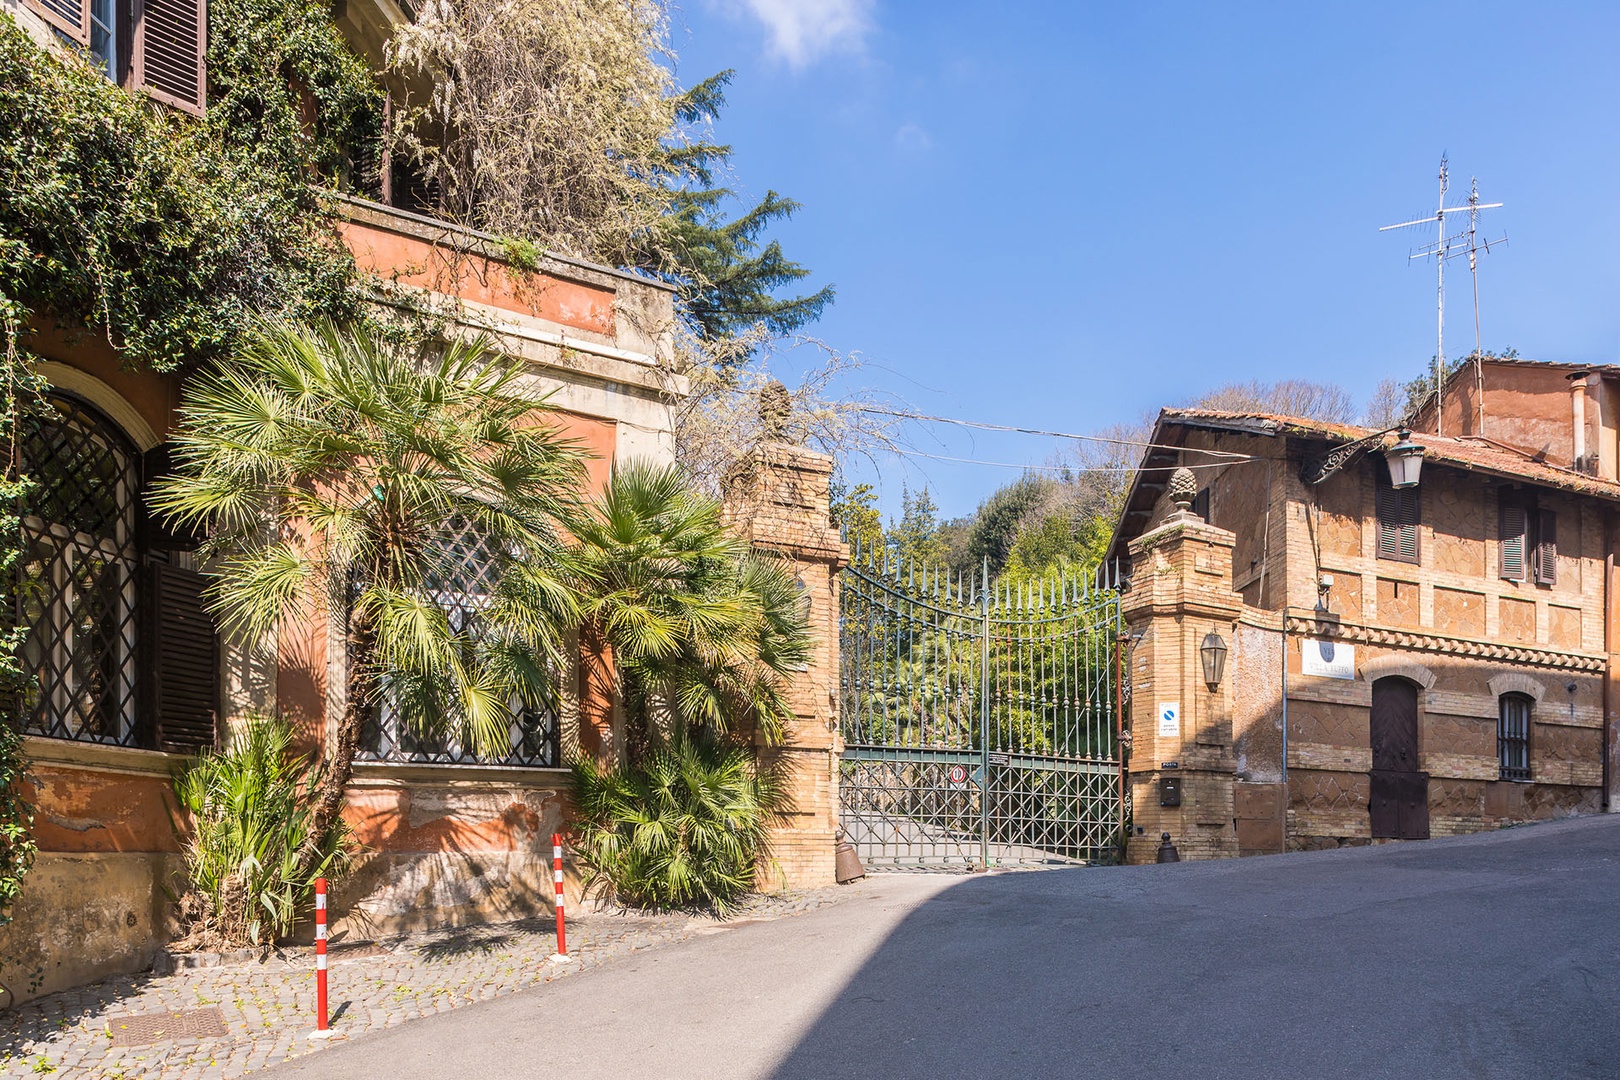 Private gate to enter the serene grounds of this exclusive estate.